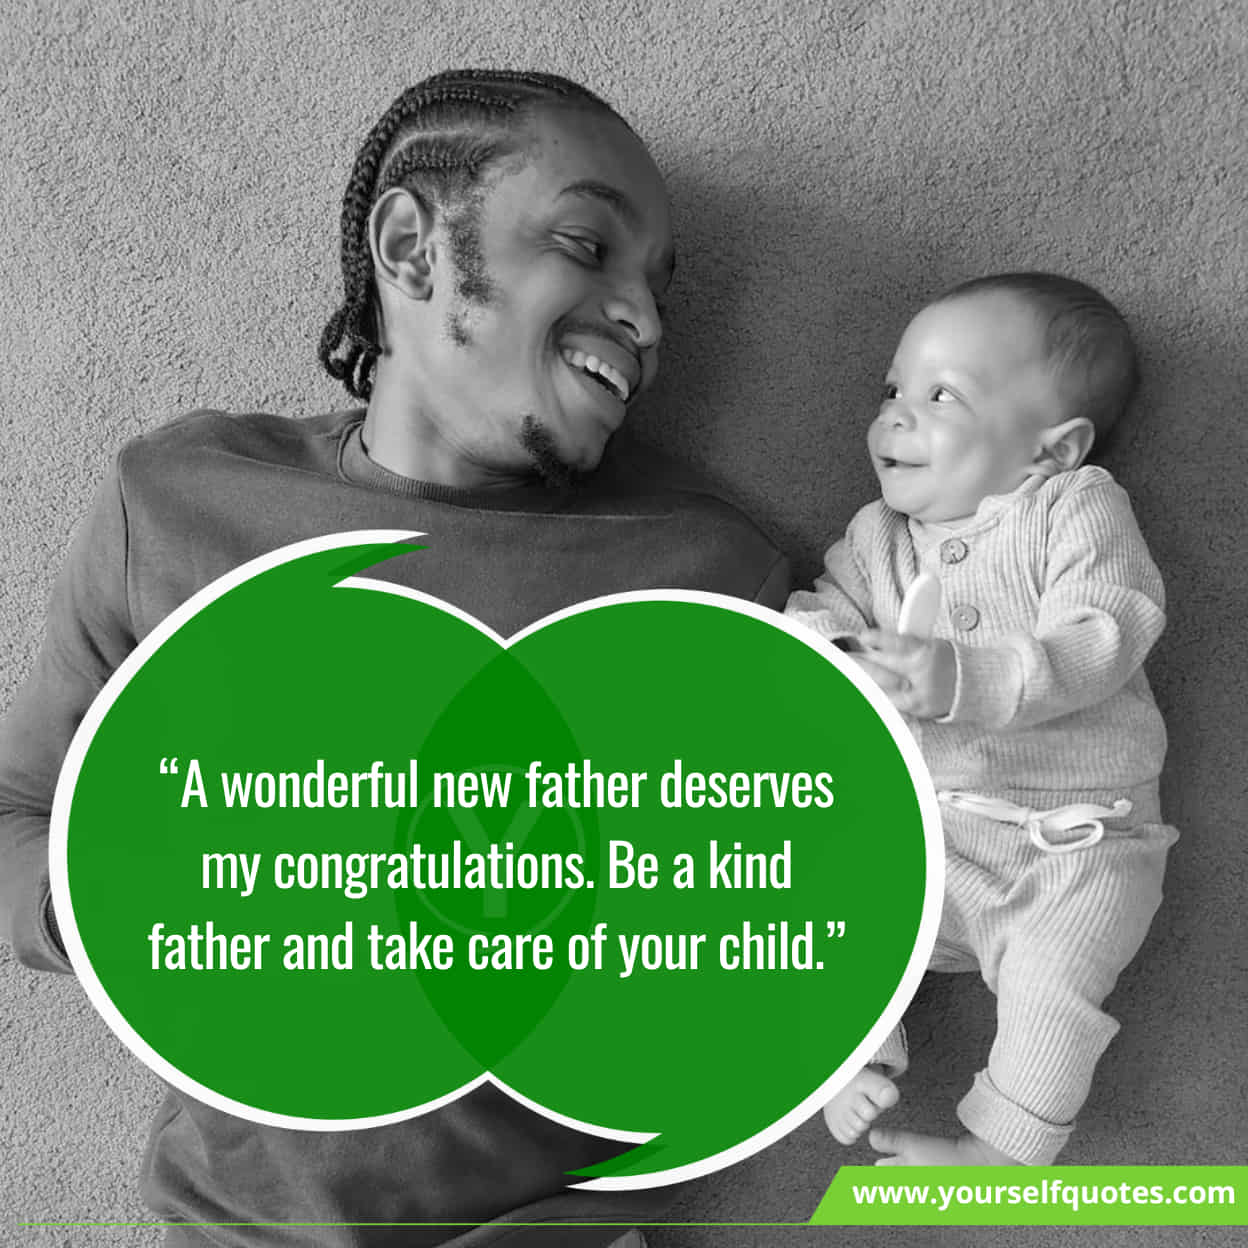 Heart Melting Congratulations Messages for Father to Be